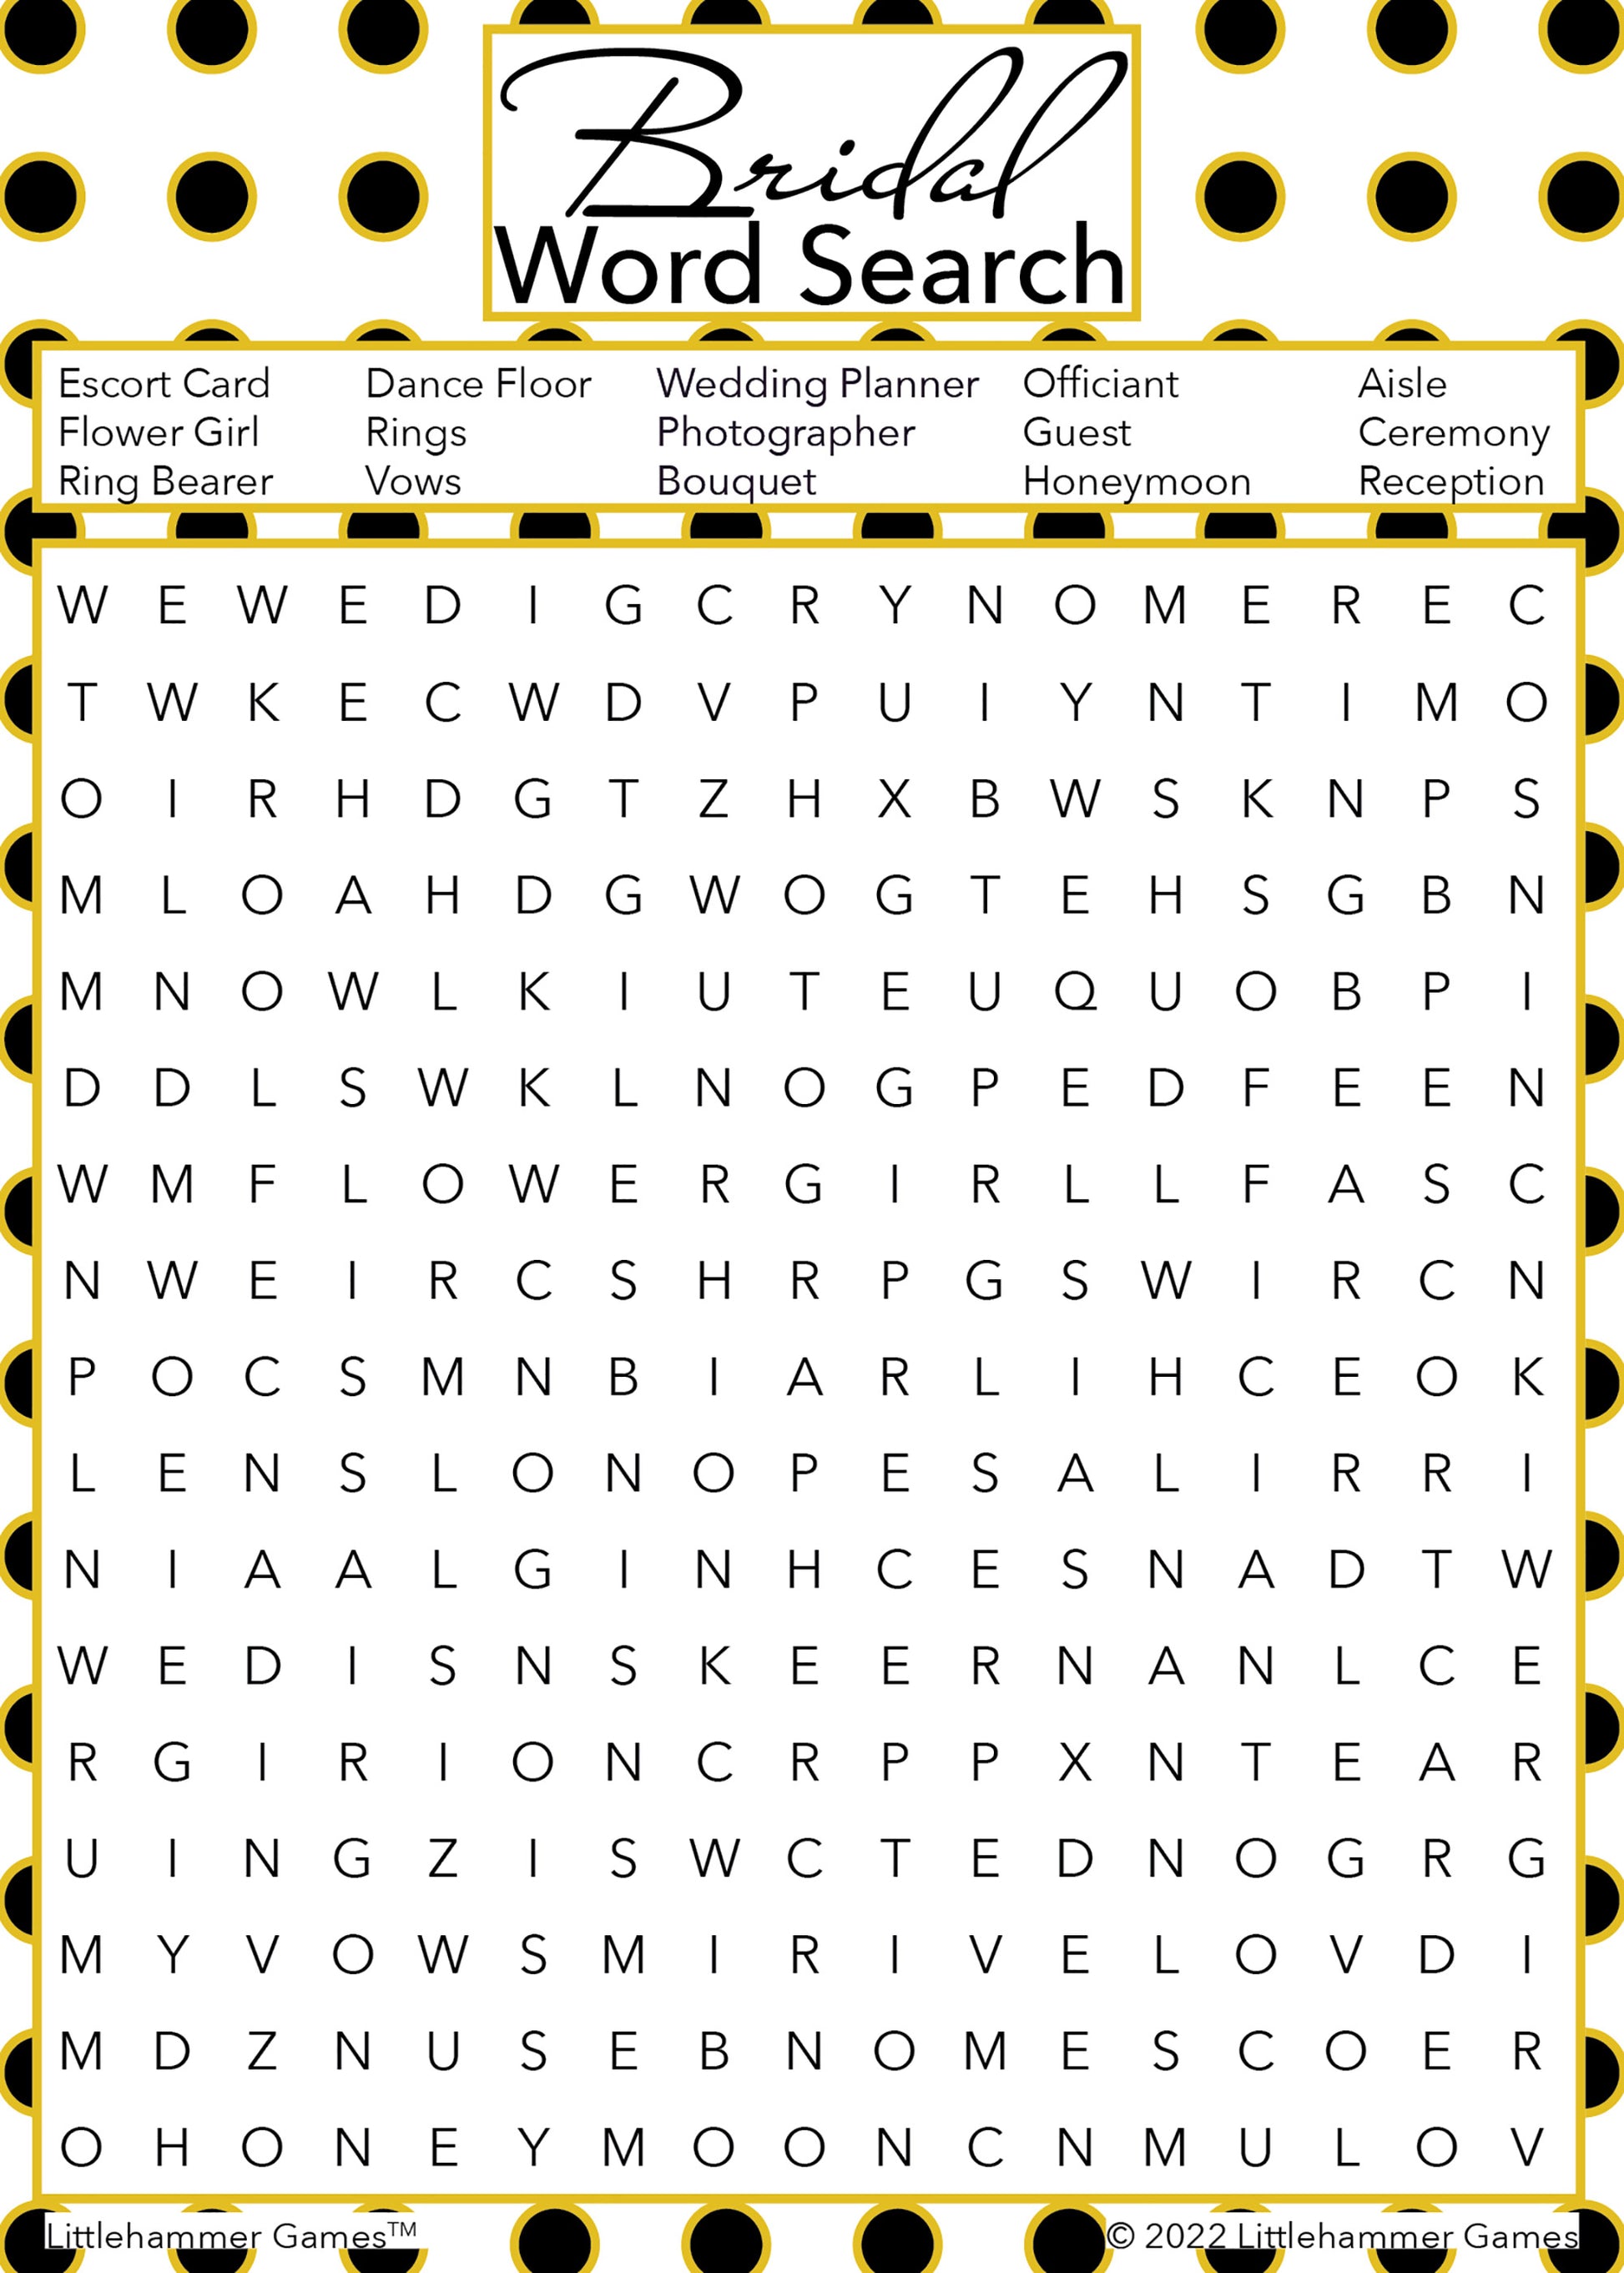 Bridal Word Search game card with a black and gold polka dot background